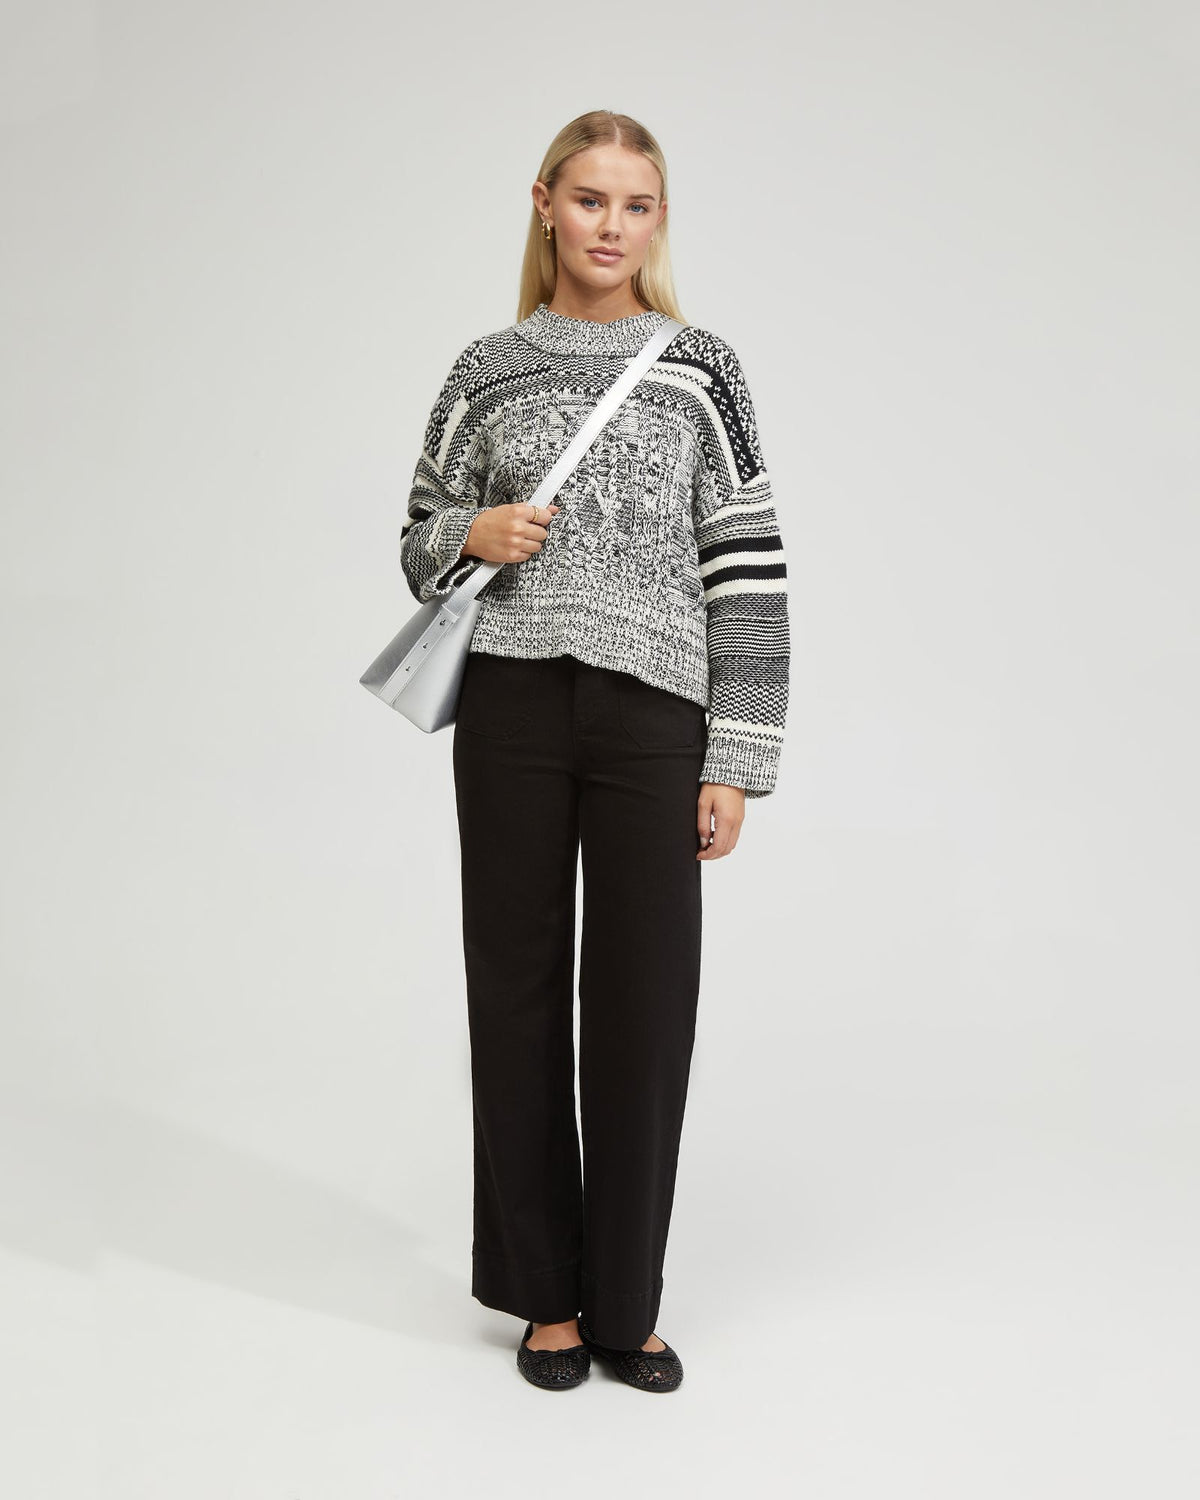 SAVANNAH CABLE KNIT - AVAILABLE ~ 1-2 weeks WOMENS KNITWEAR